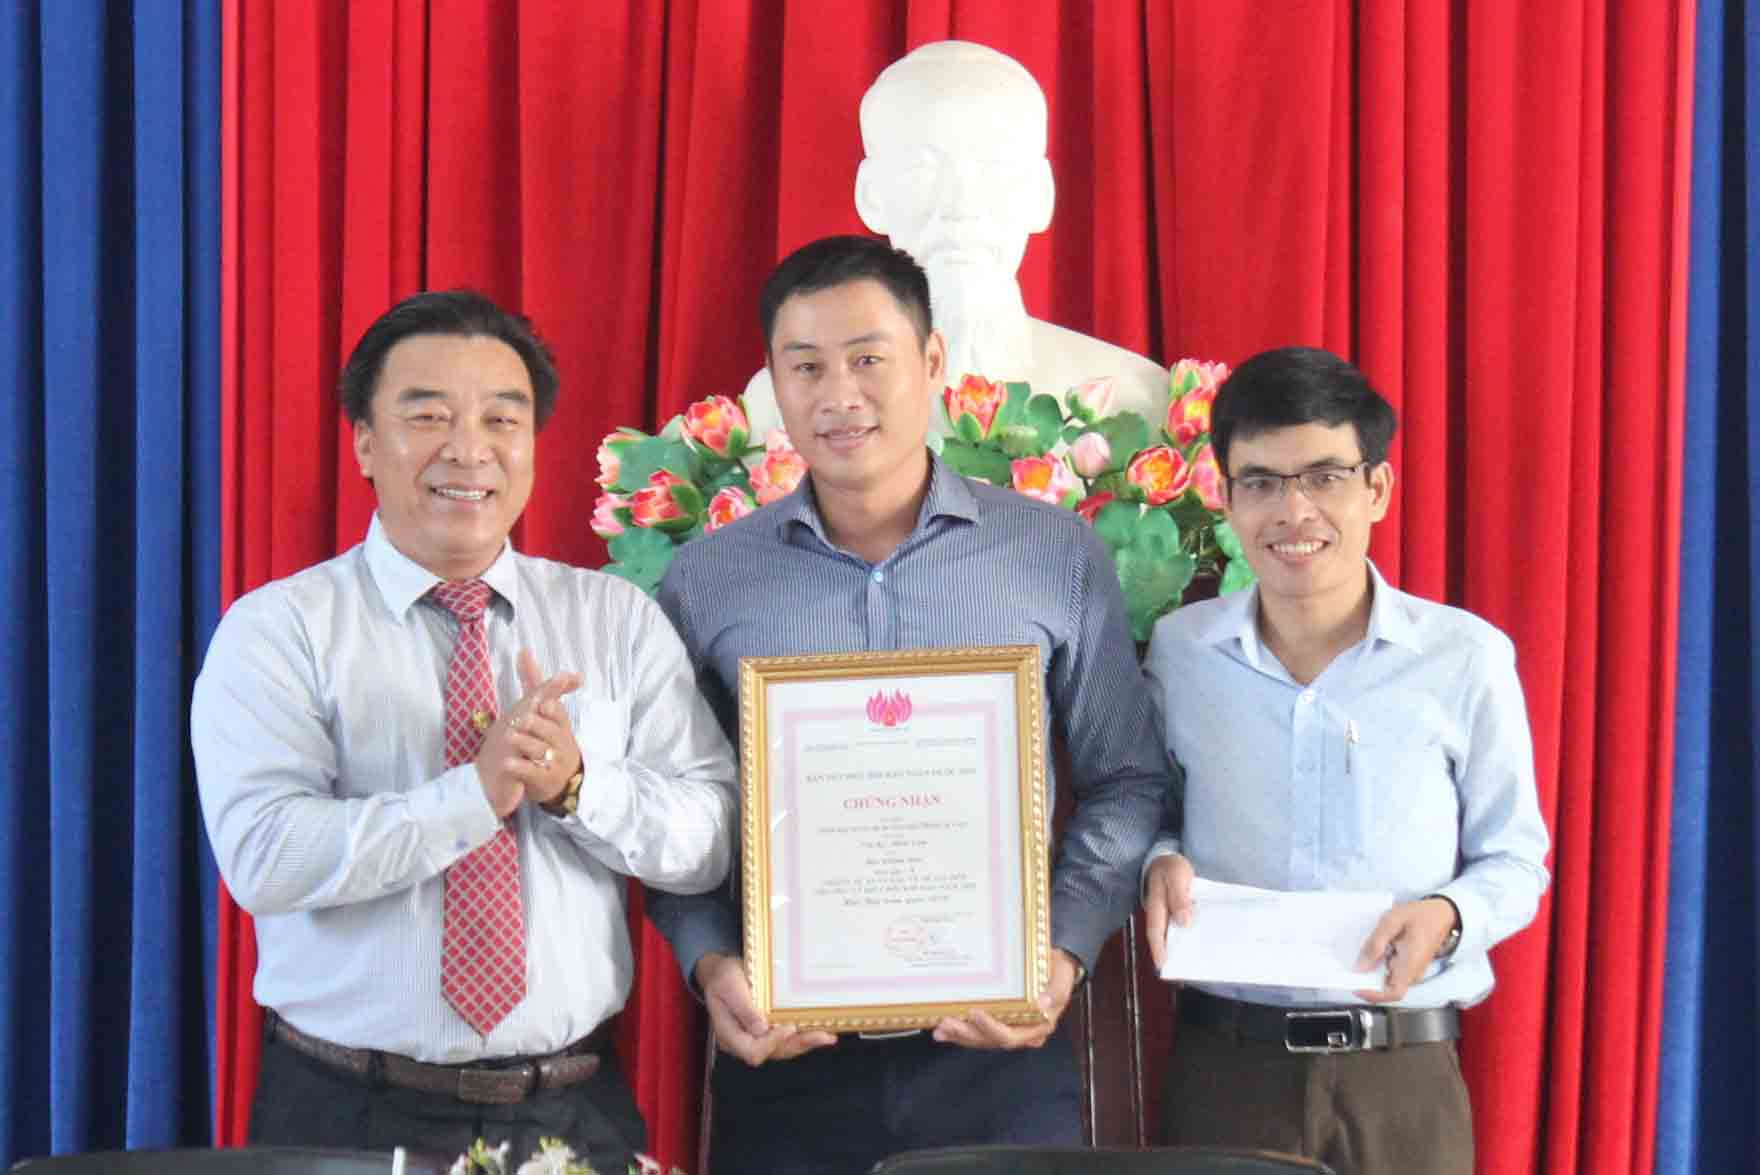 Doan Minh Long presenting Prize A to Khanh Hoa Newspaper’s journalists